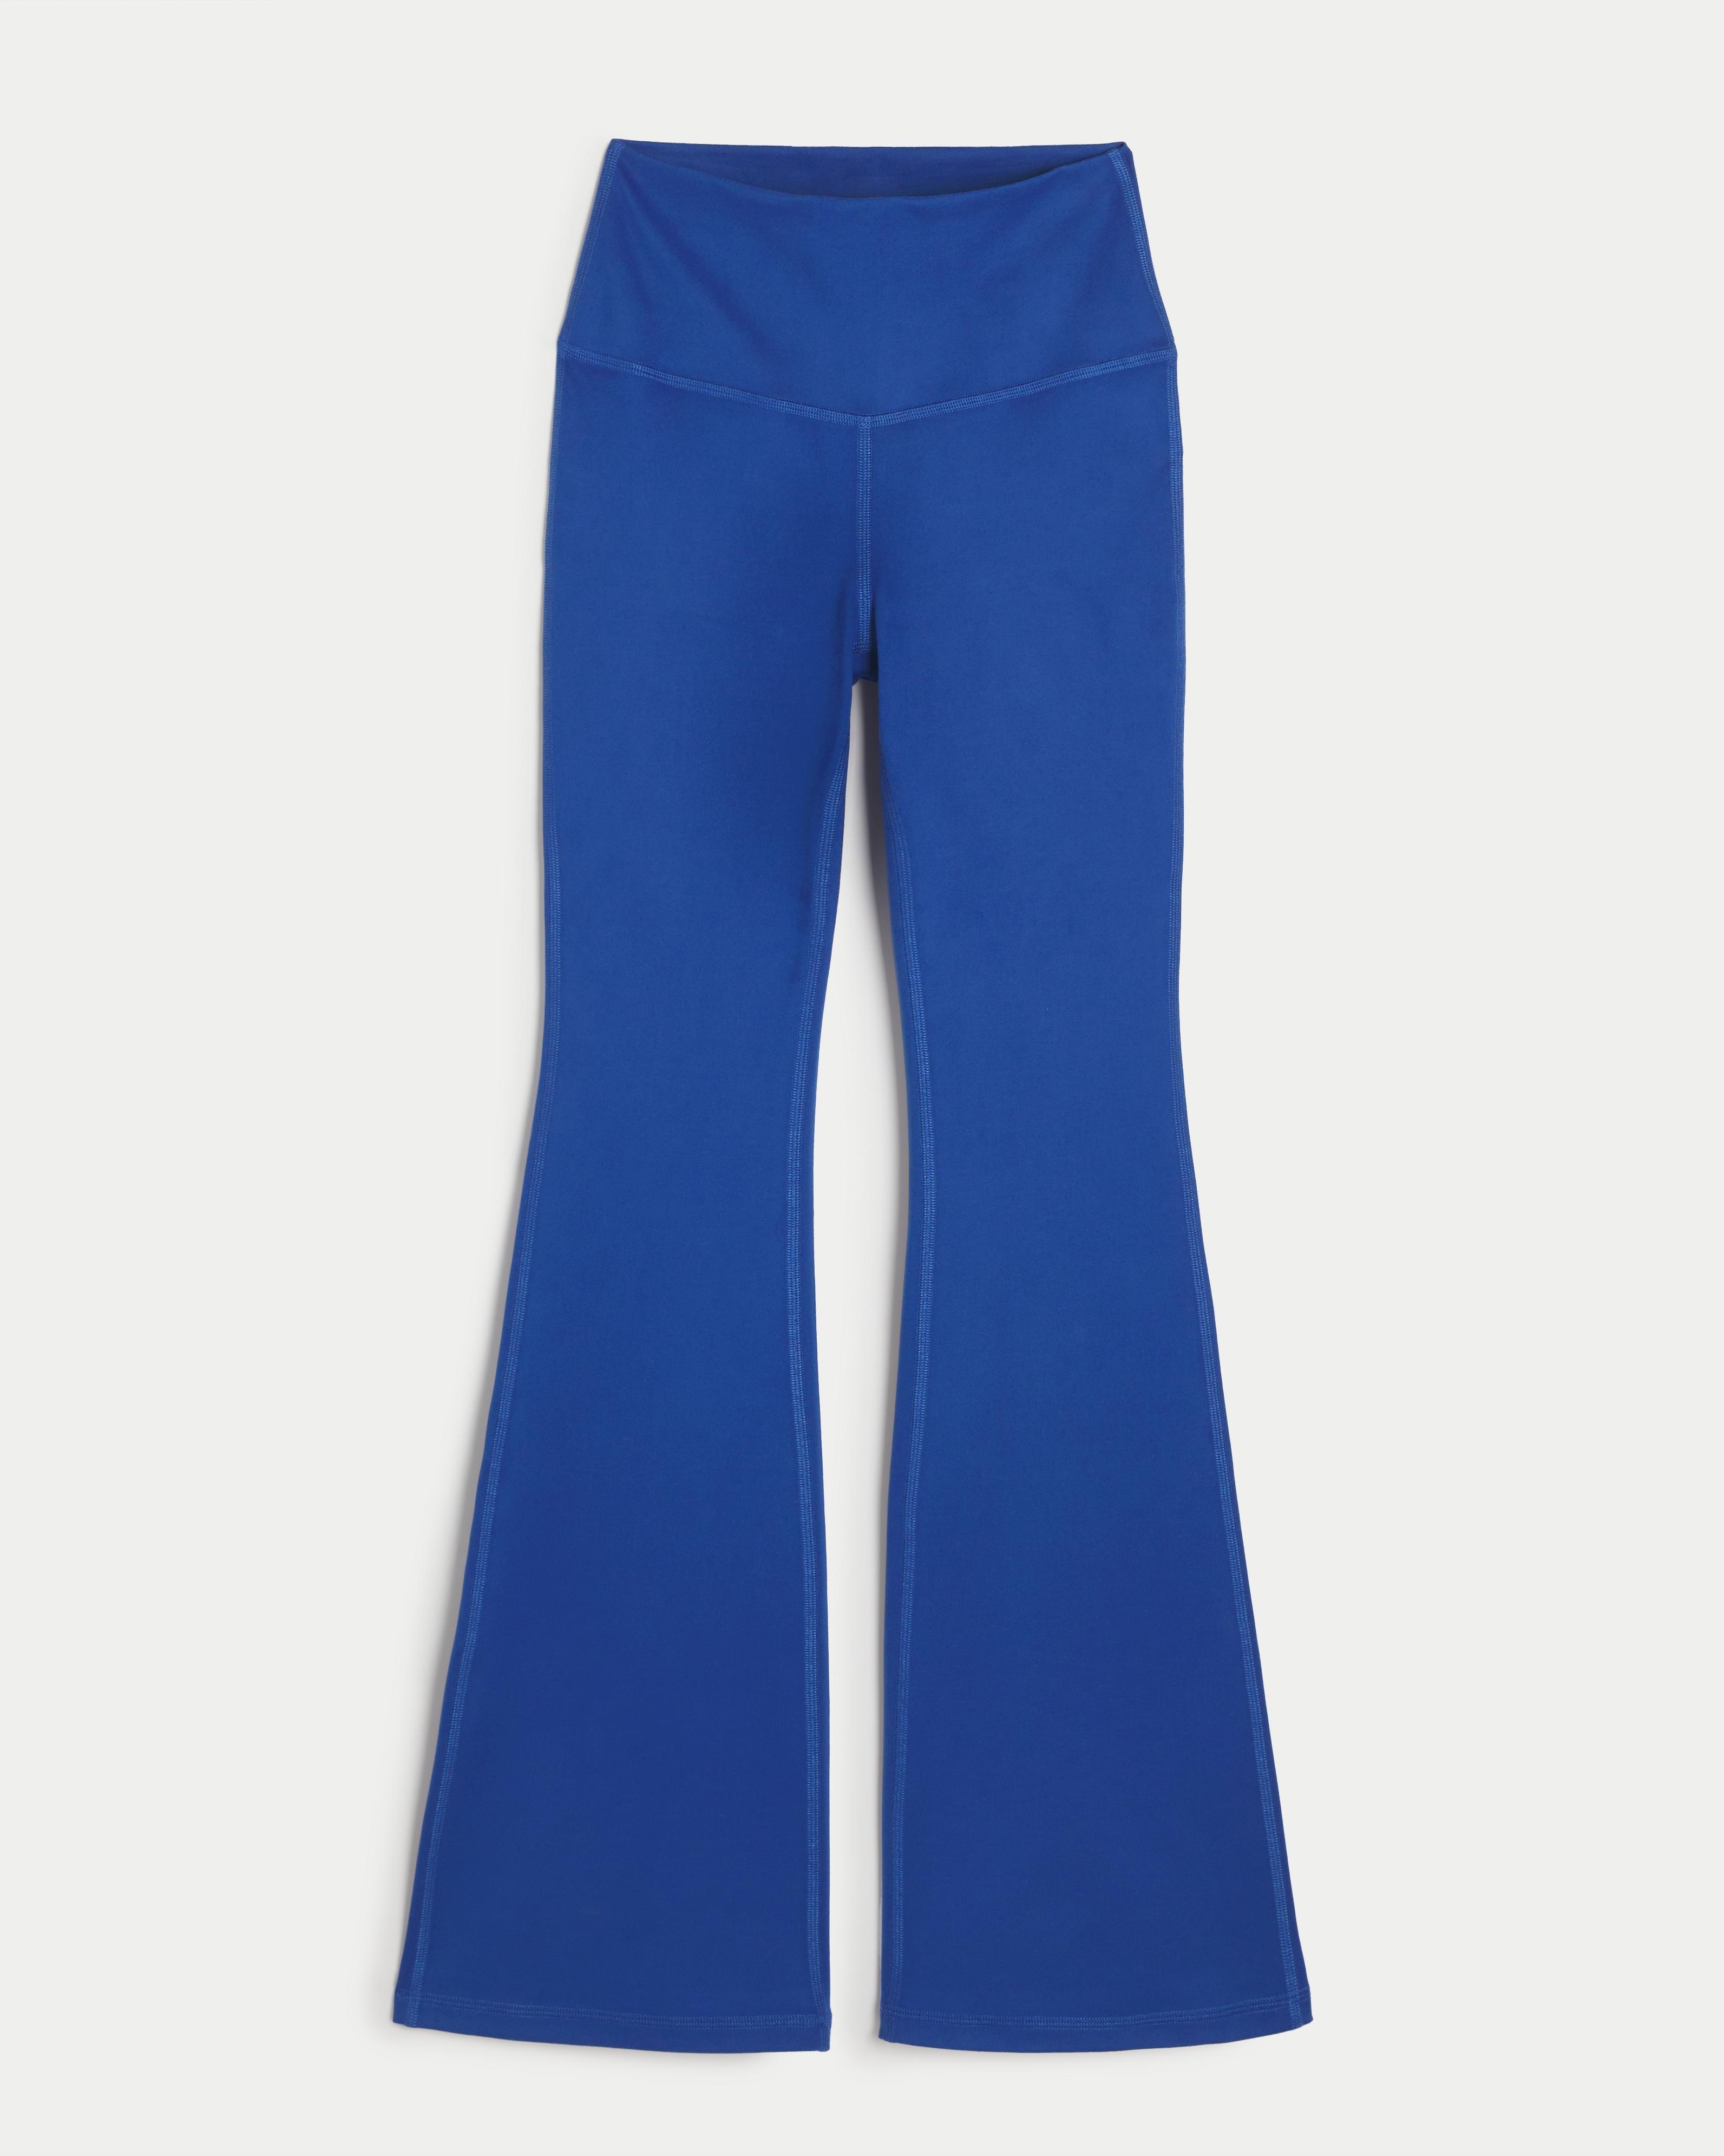 Hollister Gilly Hicks Active Recharge High-rise Flare Leggings in Blue